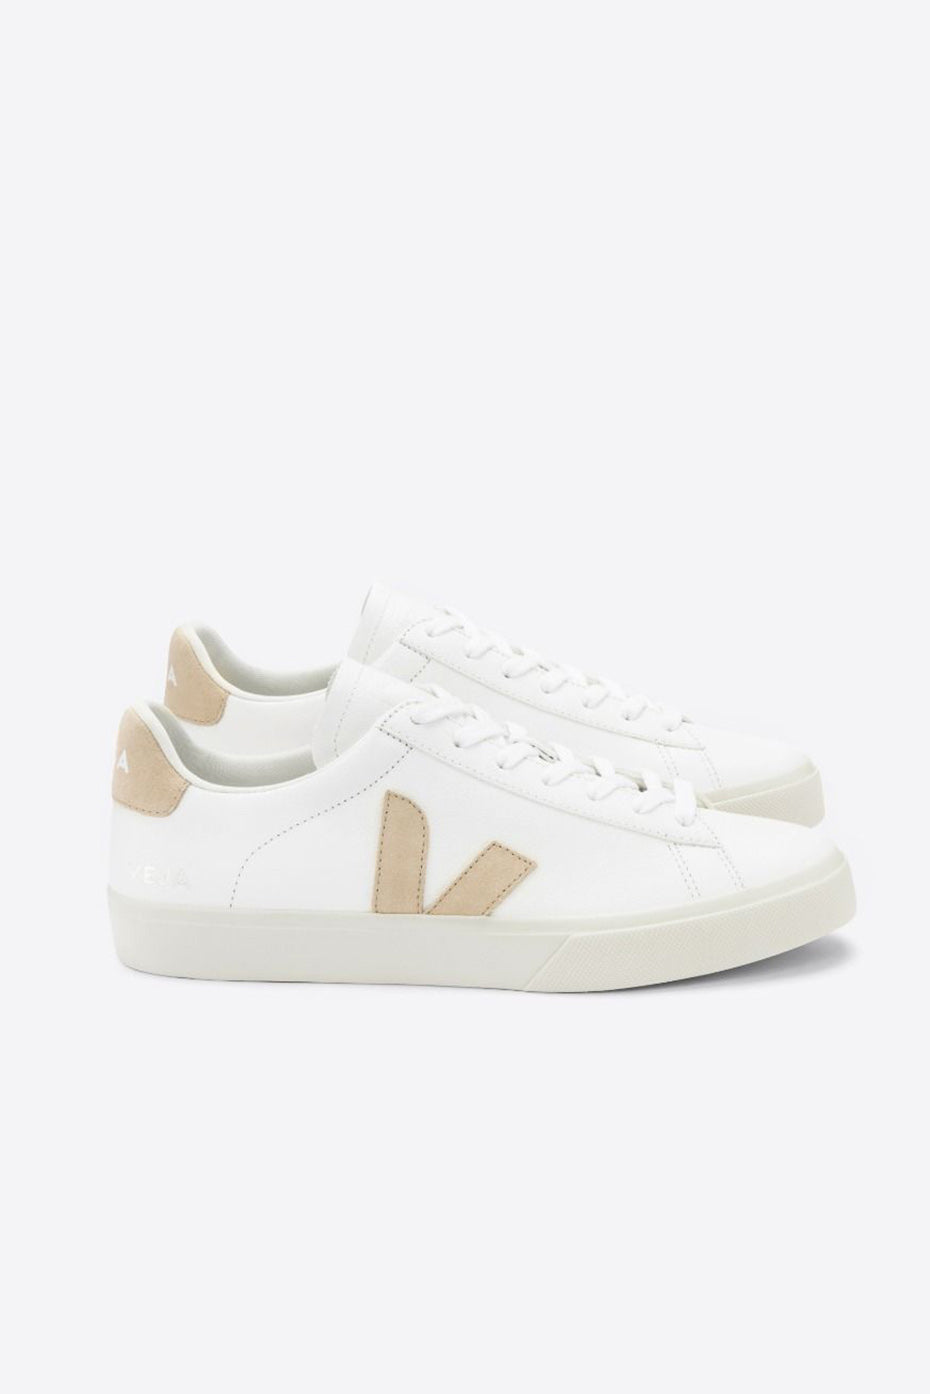 Veja Extra White Almond Campo Chromefree Leather Trainer Womens